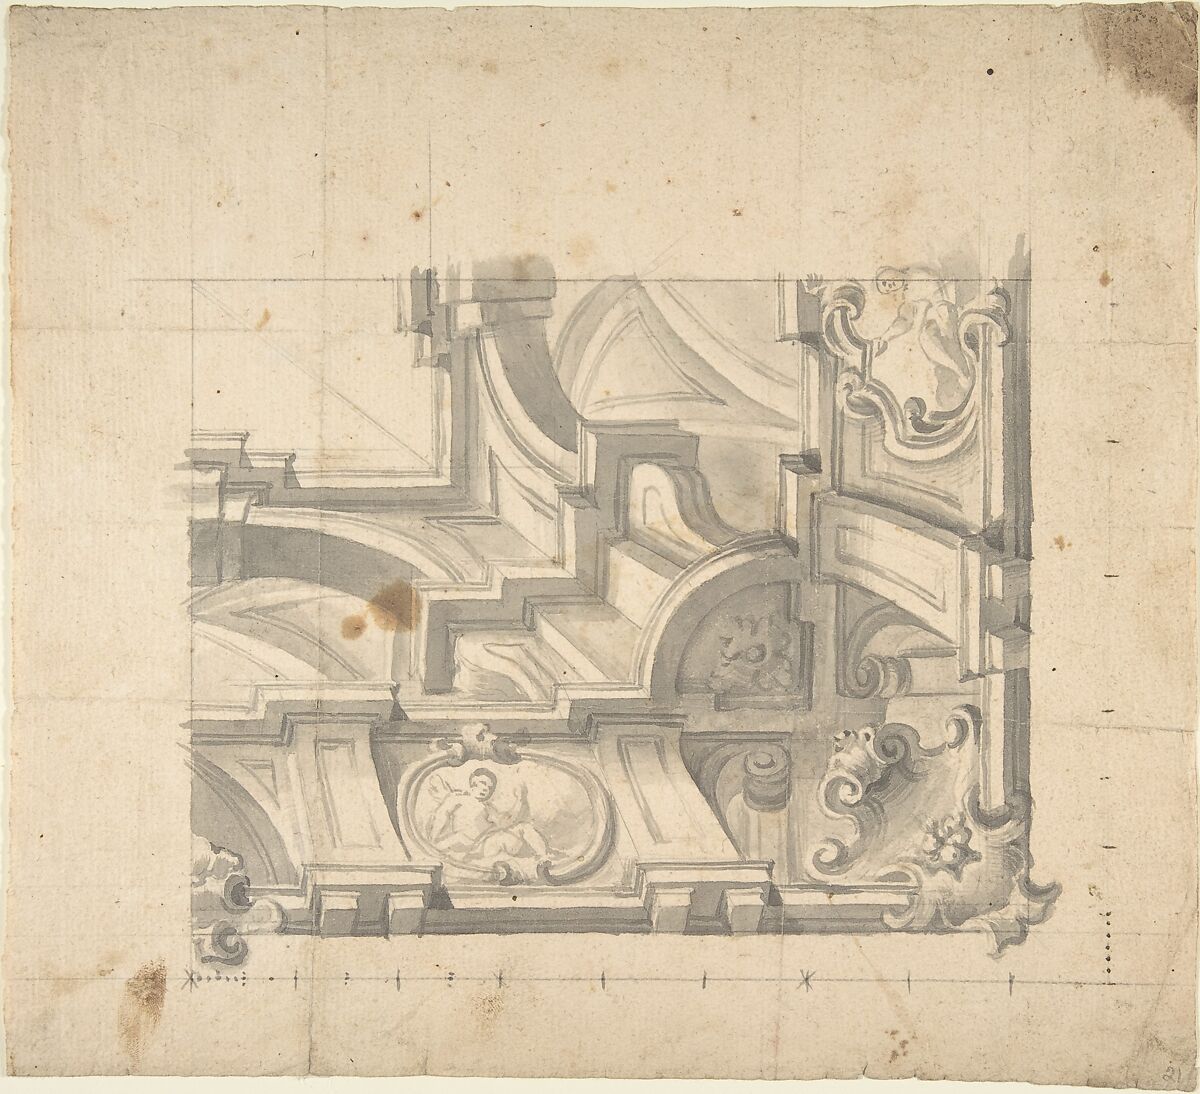 1/4 Design for a Painted Ceiling, architectural perspective, Anonymous, Italian, Piedmontese, 18th century, Brush and gray wash over leadpoint or graphite, with ruled and compass construction. Scale at bottom of drawing in pen and gray ink over leadpoint 